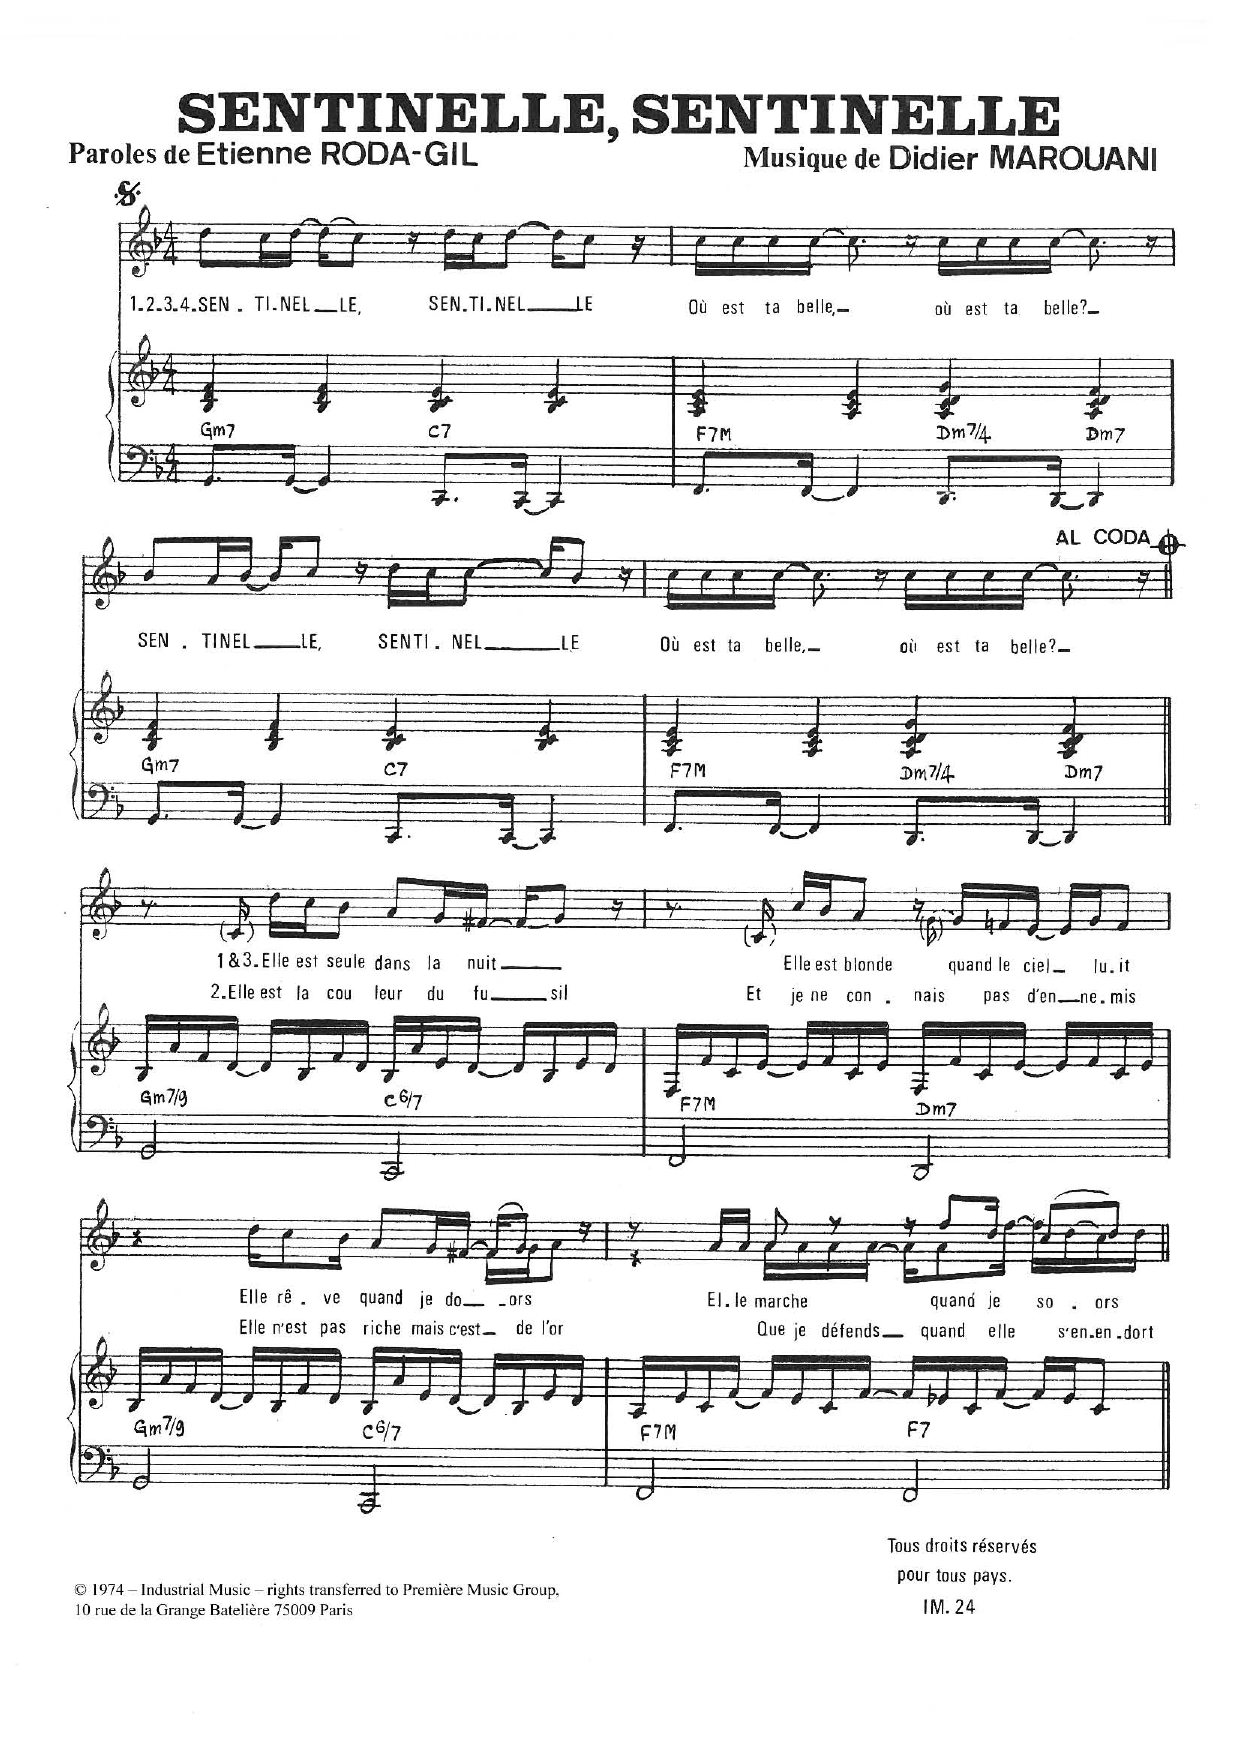 Download Didier Marouani Sentinelle, Sentinelle Sheet Music